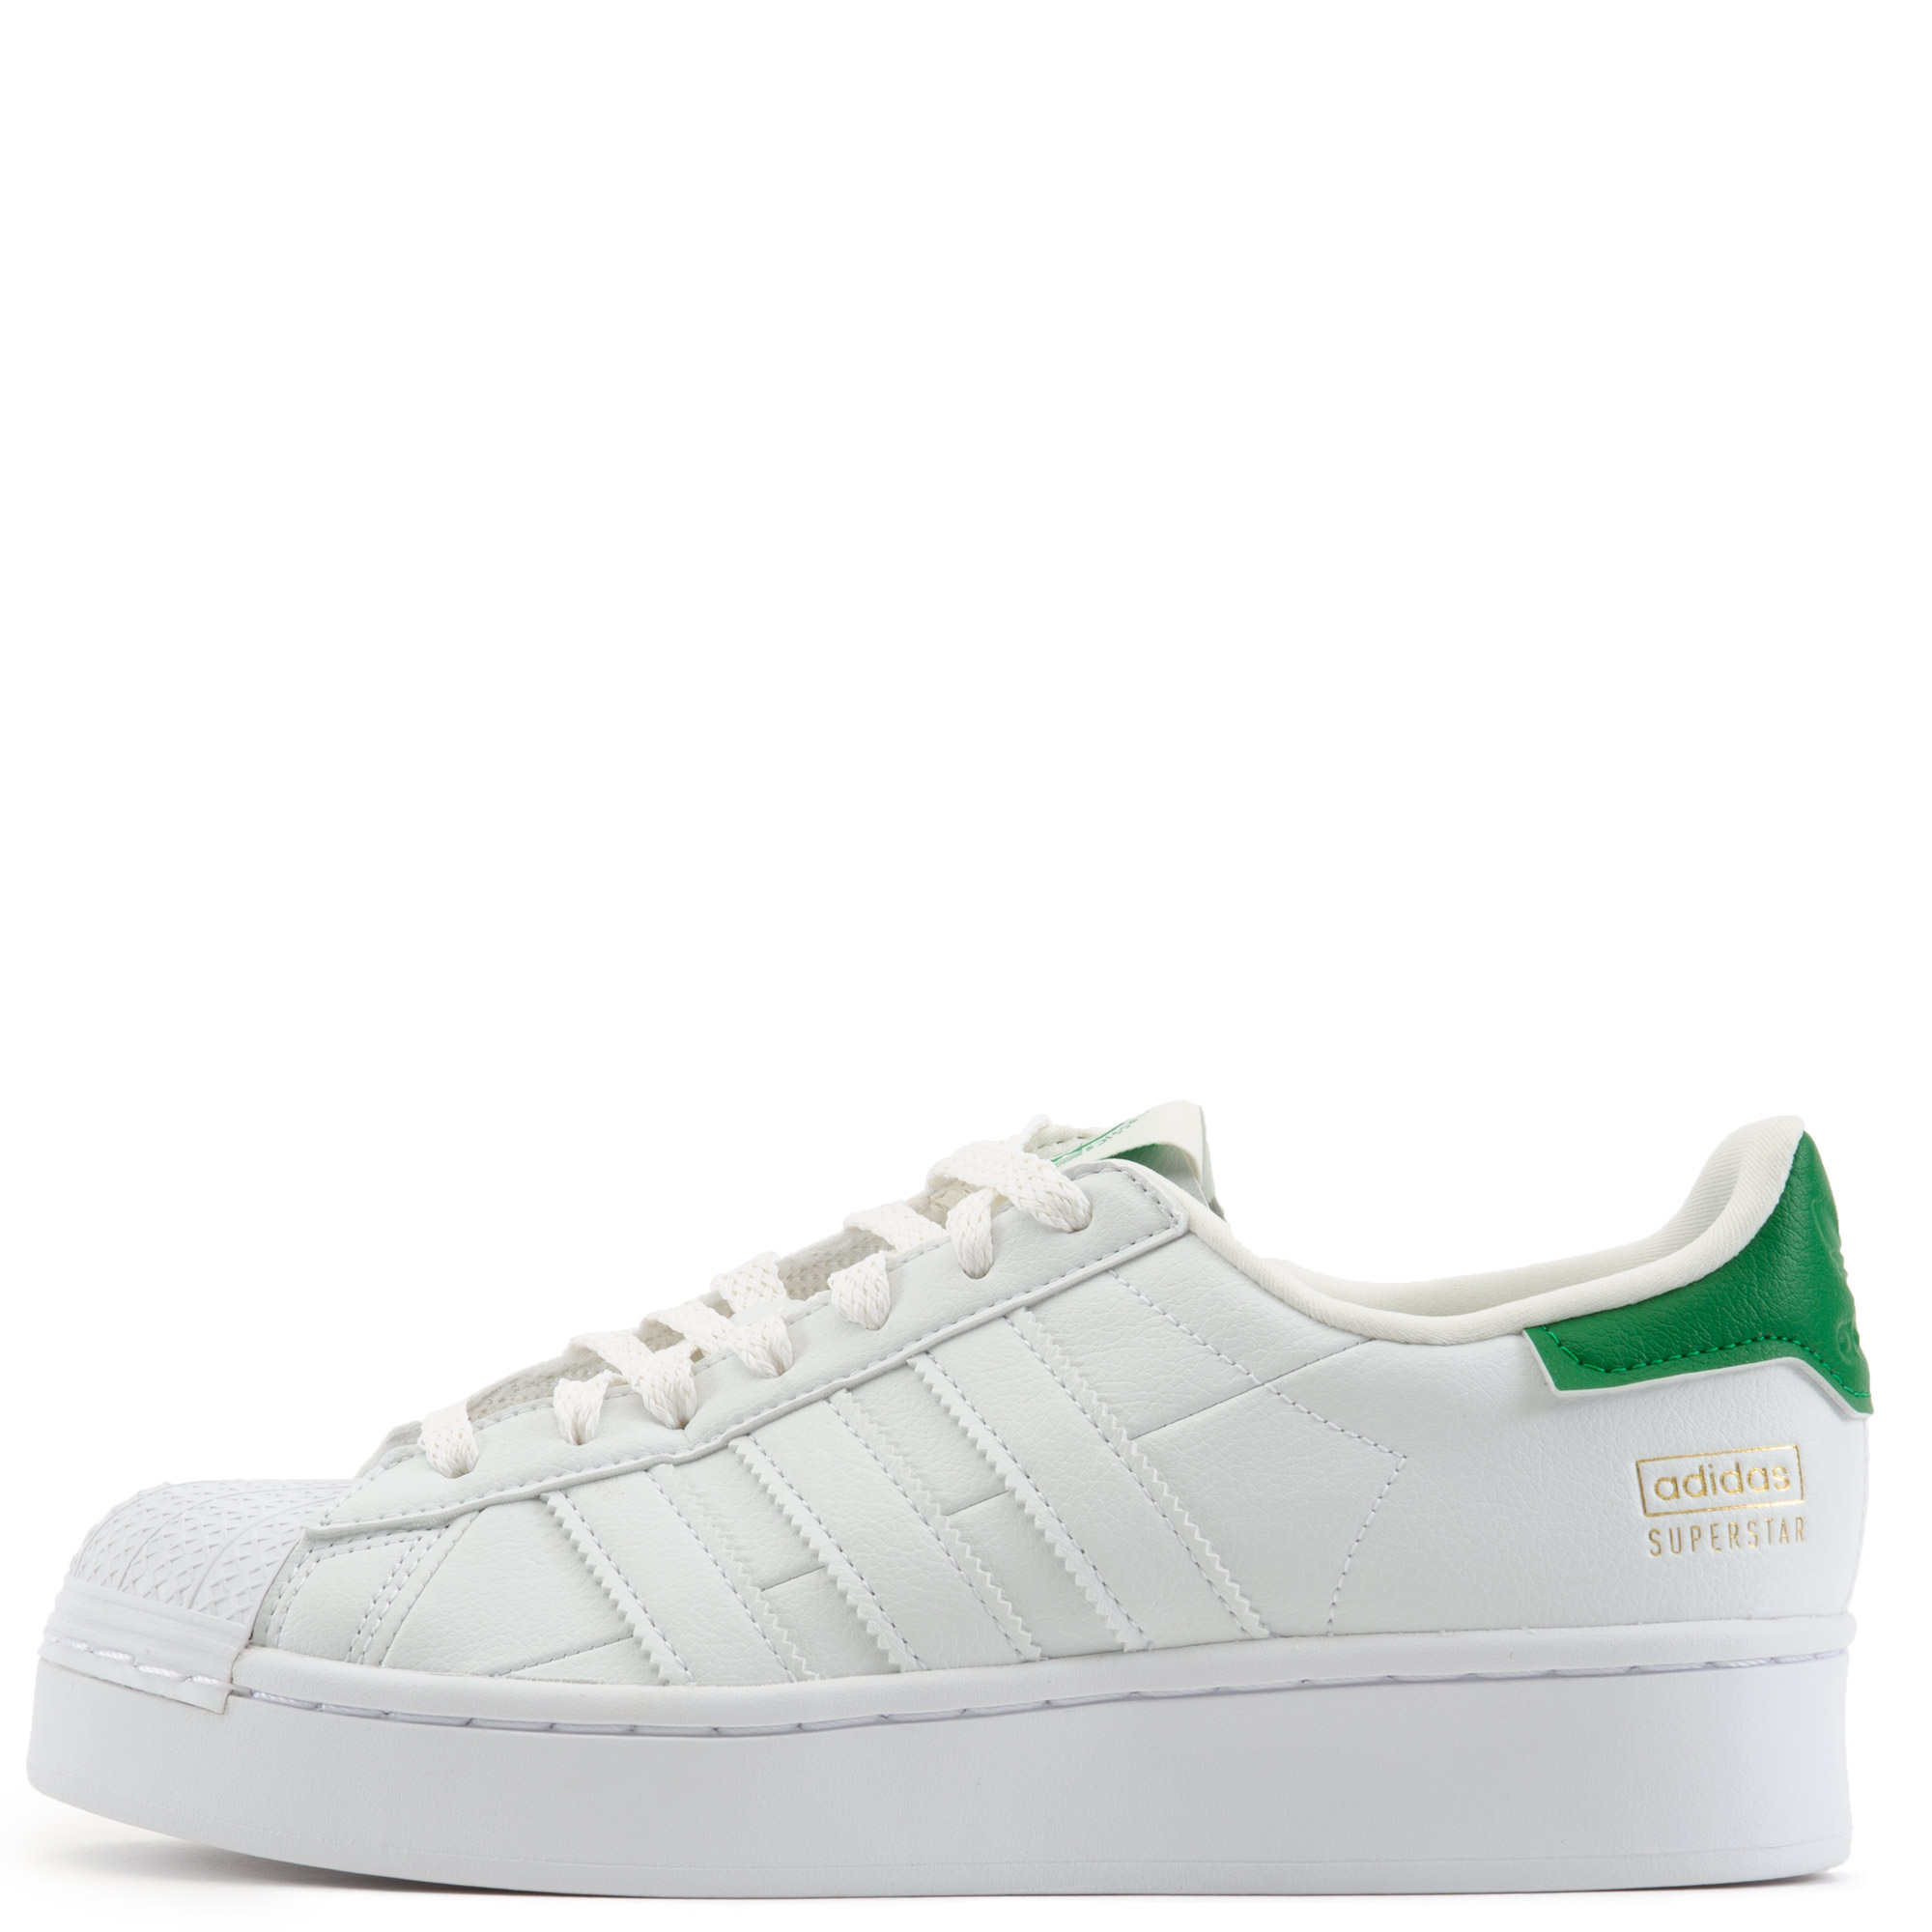 adidas Superstar Bold White Green Shoes FY5481 Women Size 7.5 Sneakers  Shell Toe